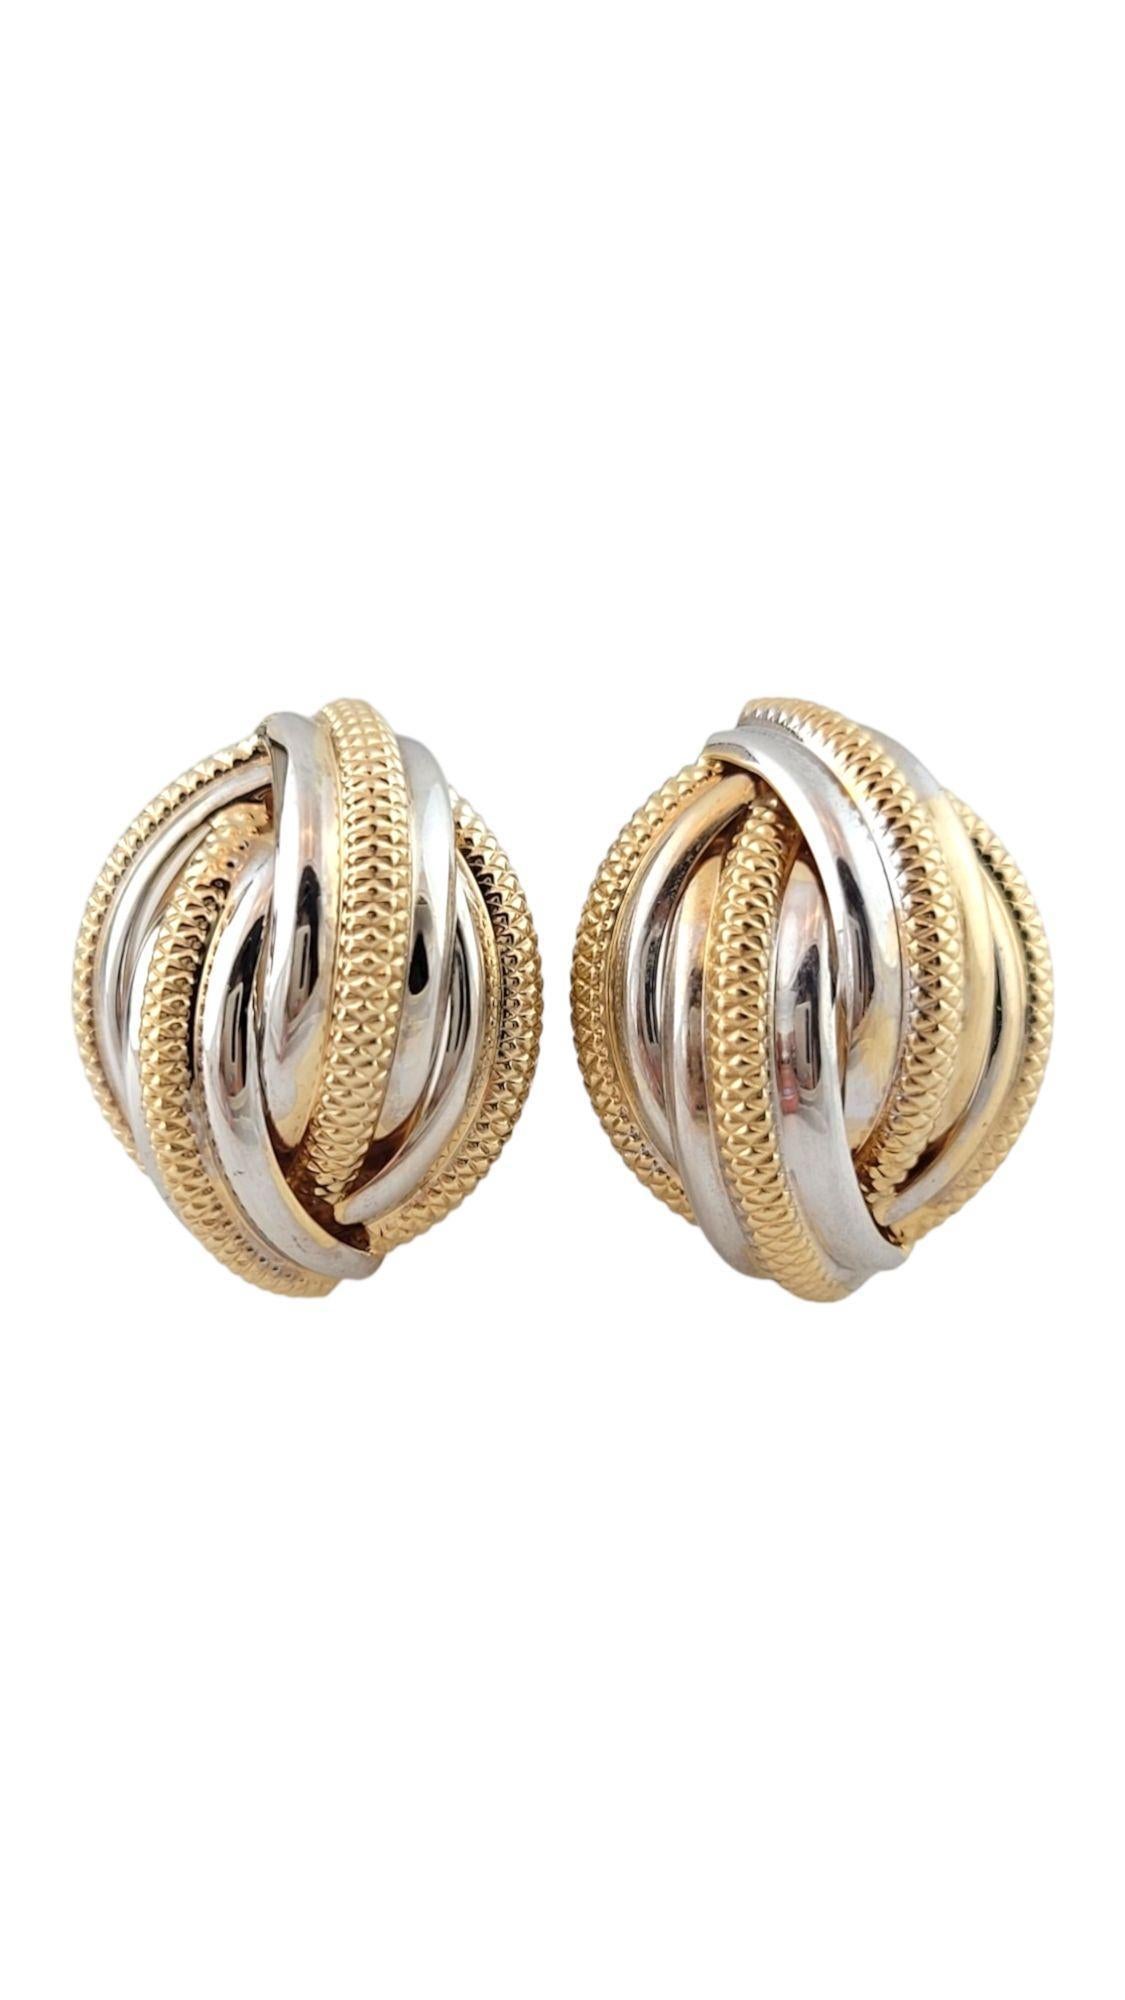 Vintage 14K Yellow and White Gold Knot Earrings

Gorgeous set of 14K yellow and white gold earrings in a beautifully detailed knot pattern!

Size: 21.6mm X 17.2mm X 12.2mm

Weight: 5.23 g/ 3.4 dwt

Hallmark: 14K

Very good condition, professionally